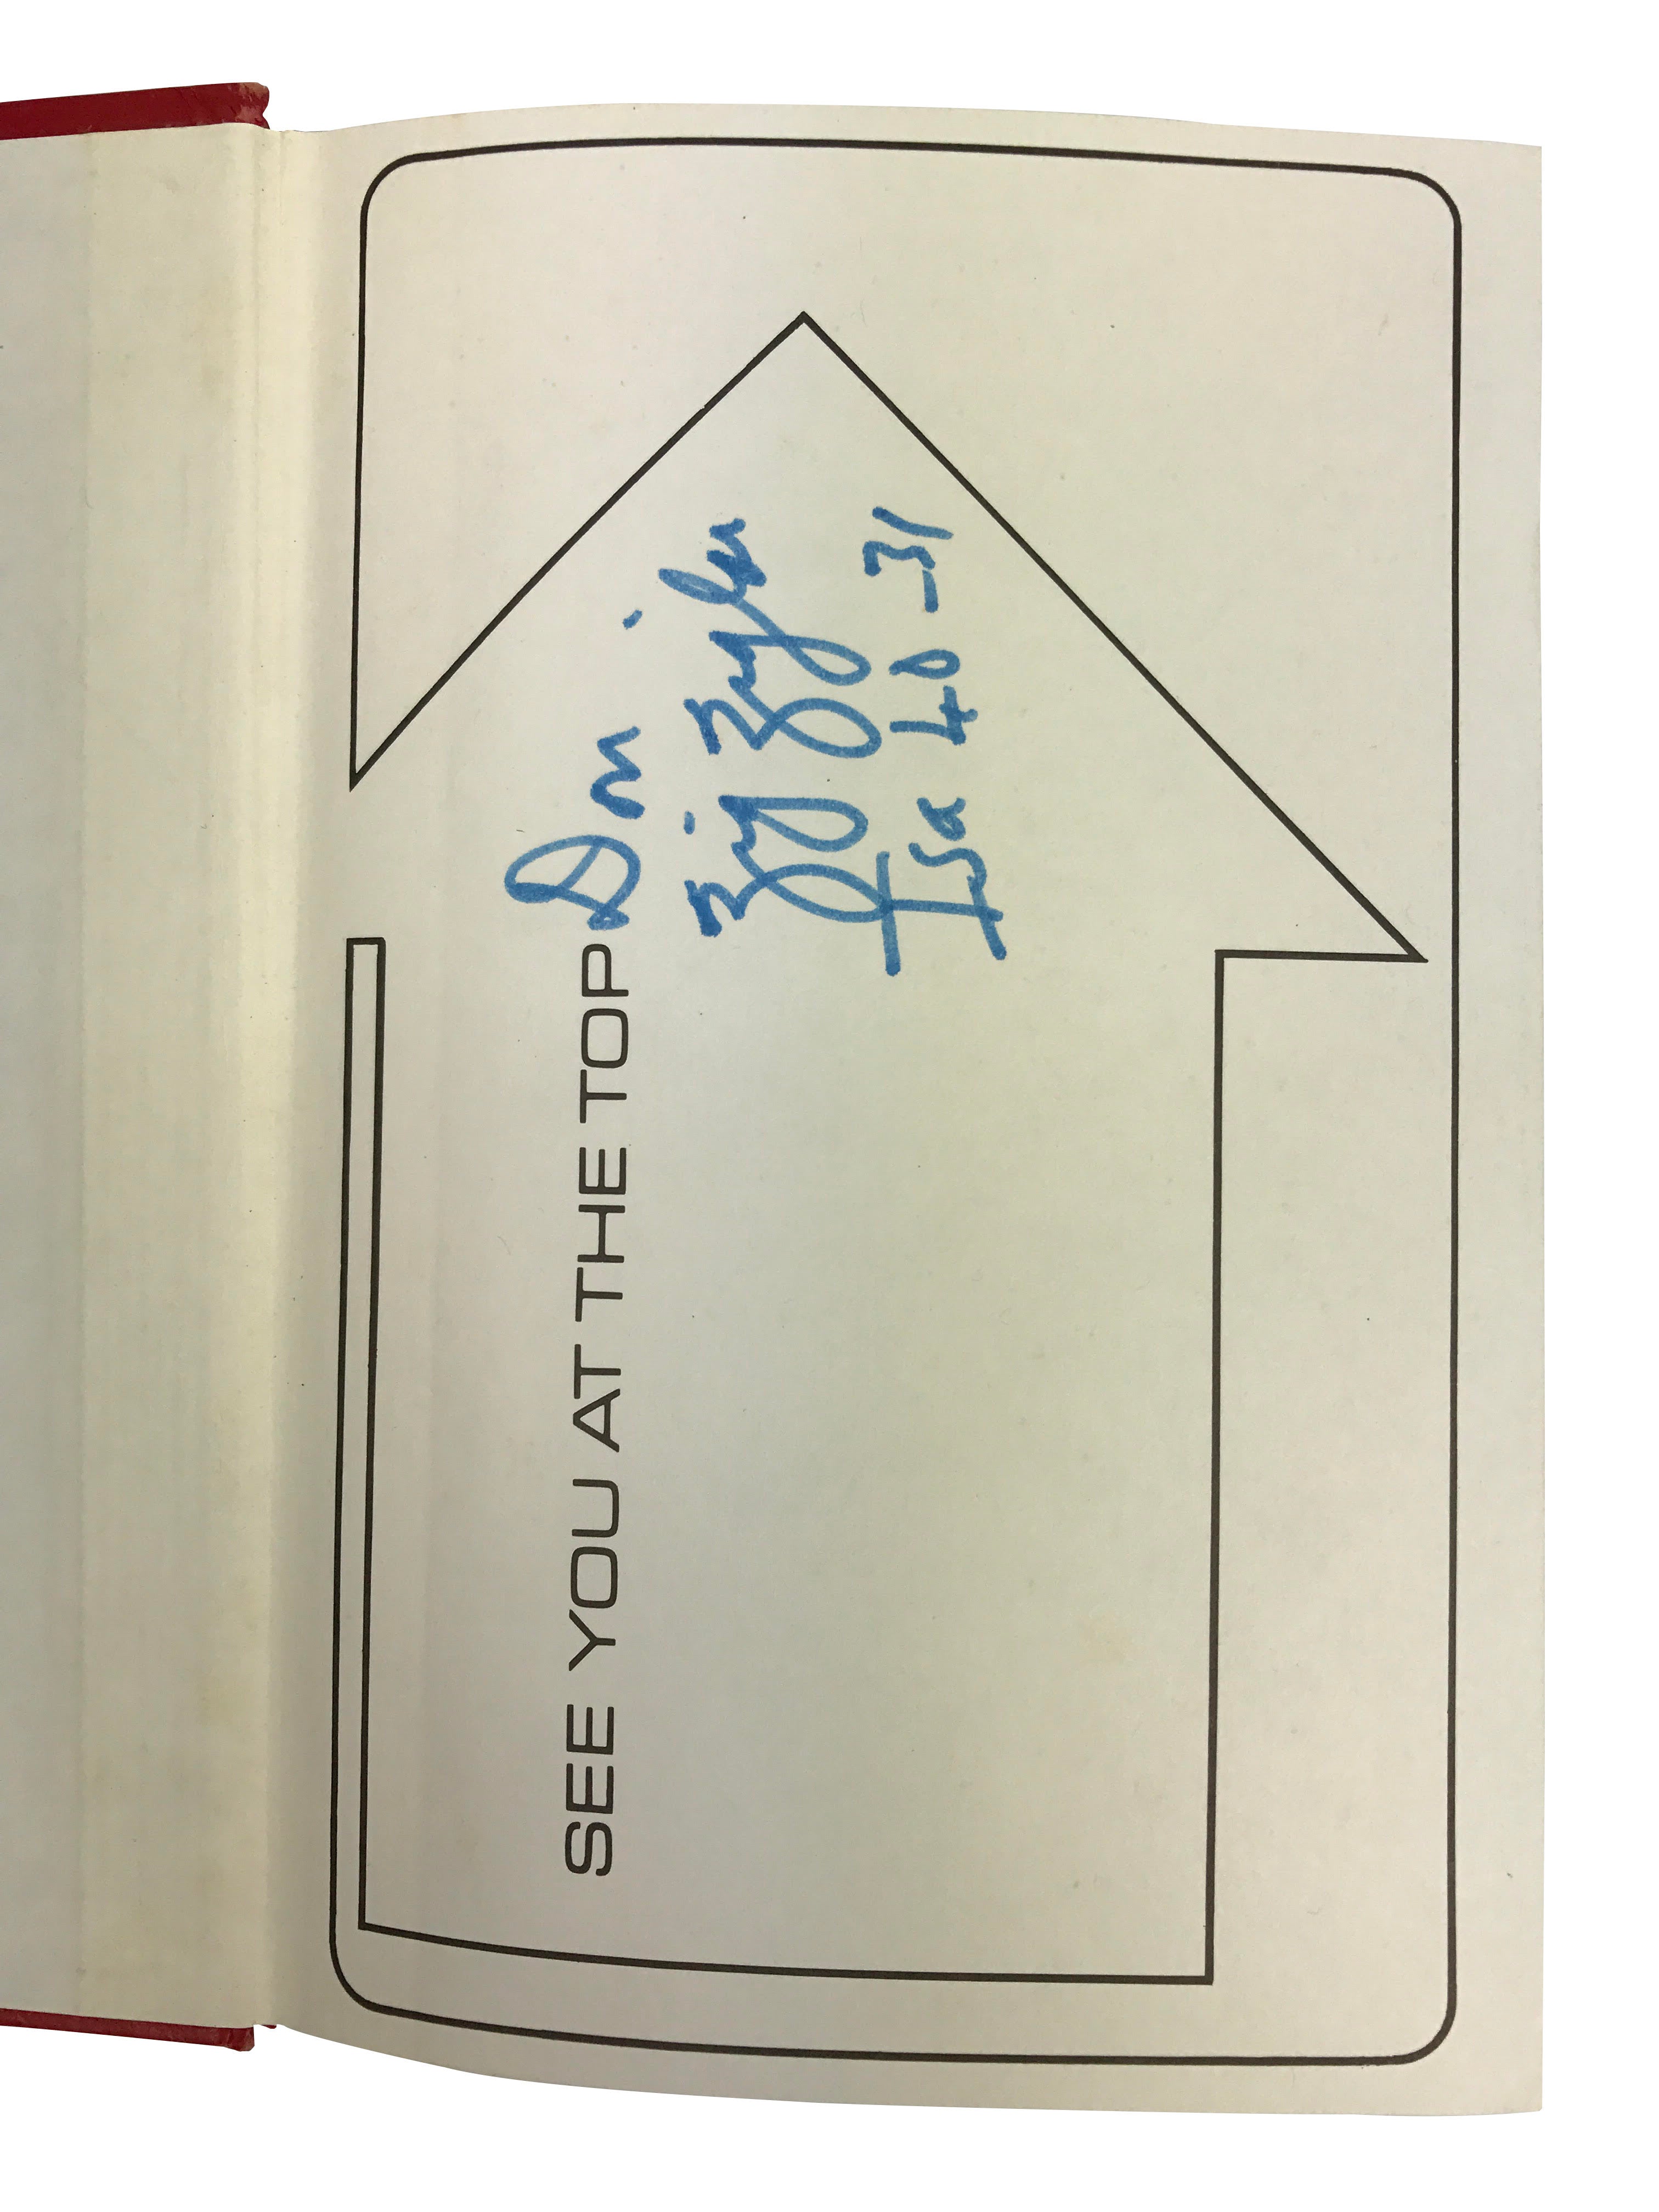 Zig Ziglar Signed 1974: "See You at the TOP"